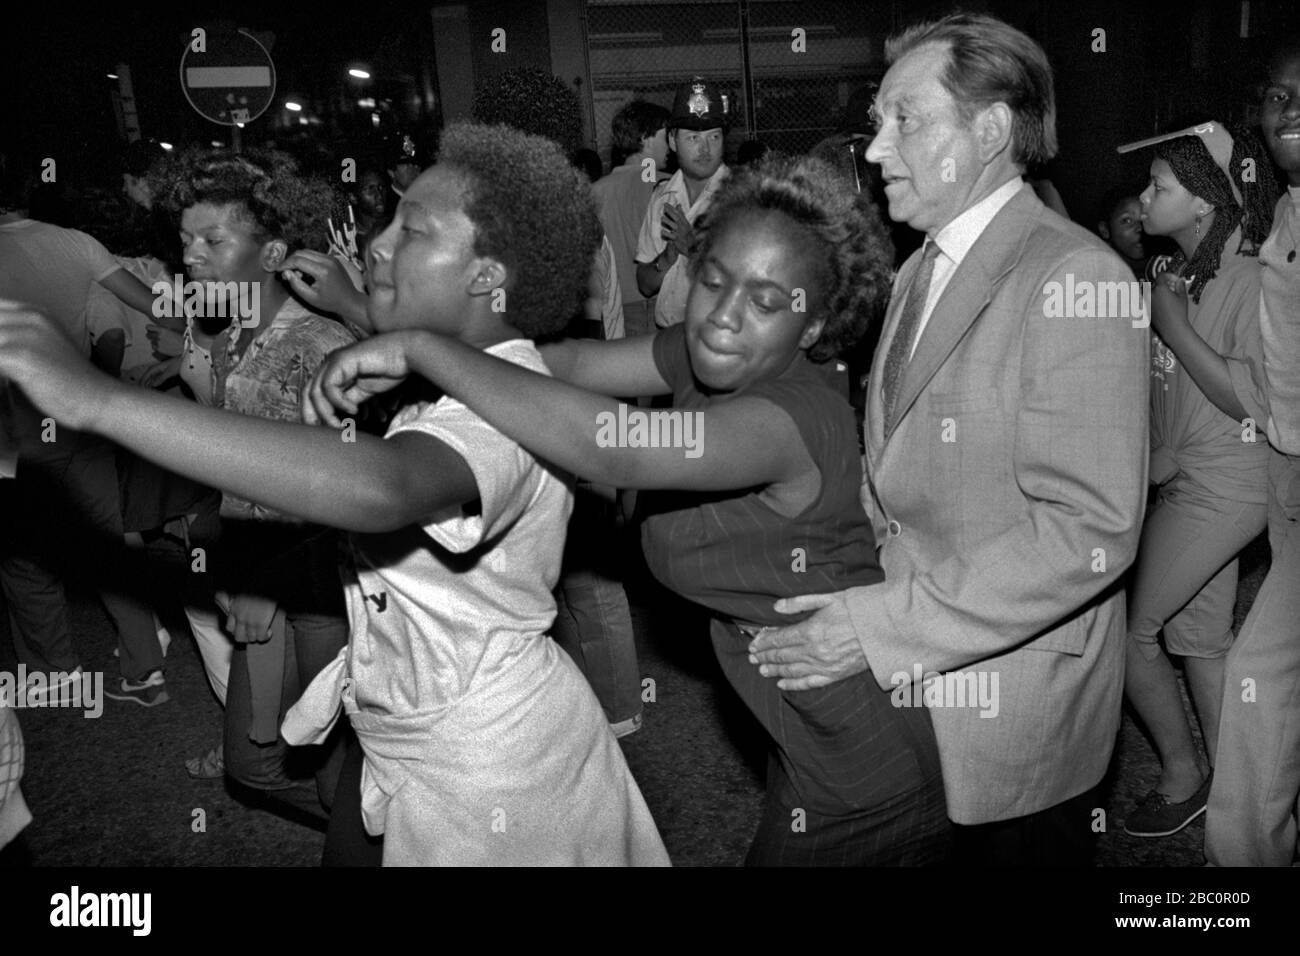 Conga Line dancing Notting Hill Carnival London 1981. Older white male too close to black female taking part in the black community Conga Line Dance. 1980s UK HOMER SYKES Stock Photo